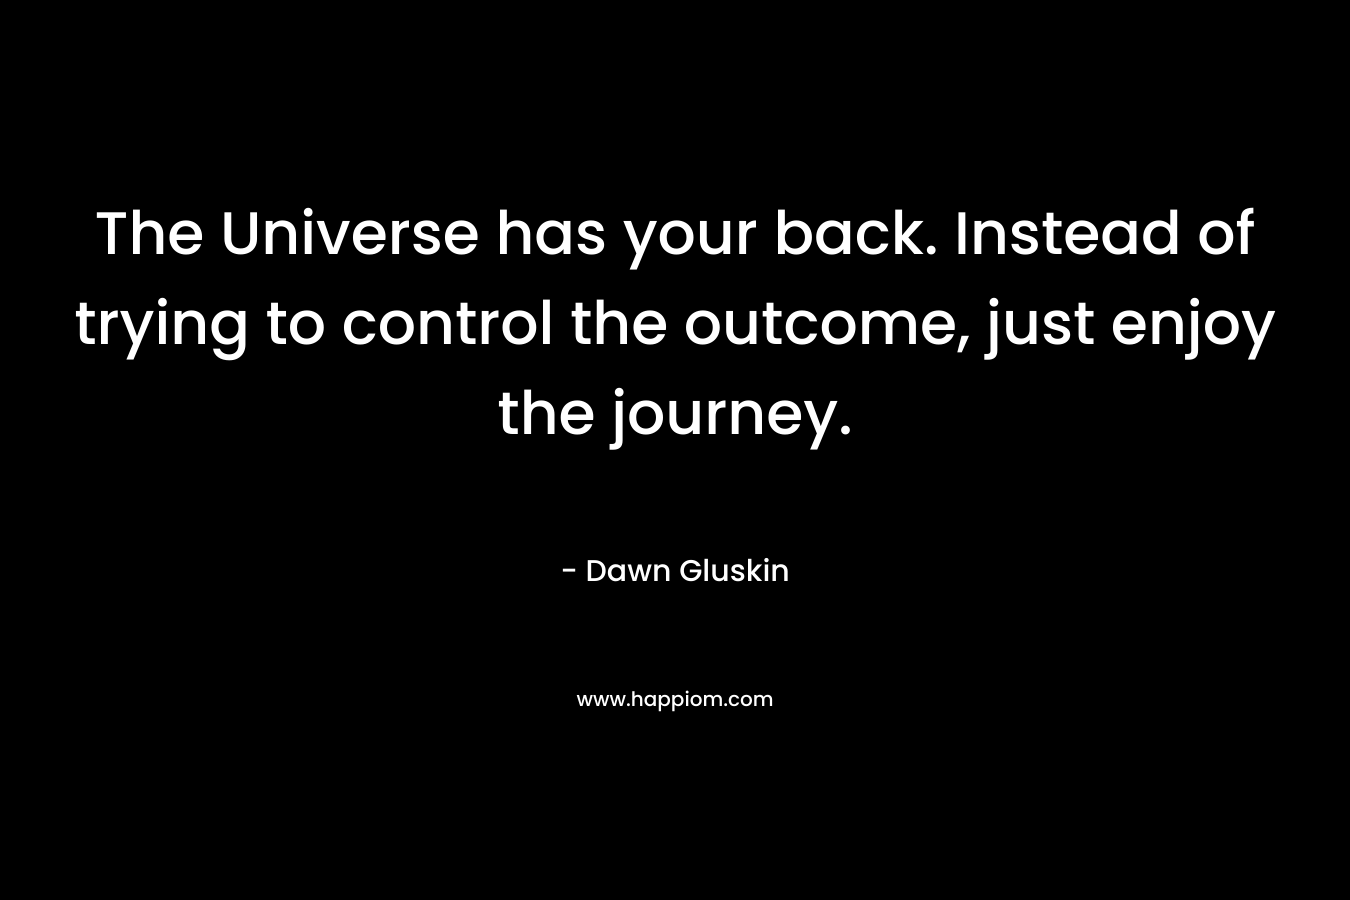 The Universe has your back. Instead of trying to control the outcome, just enjoy the journey.